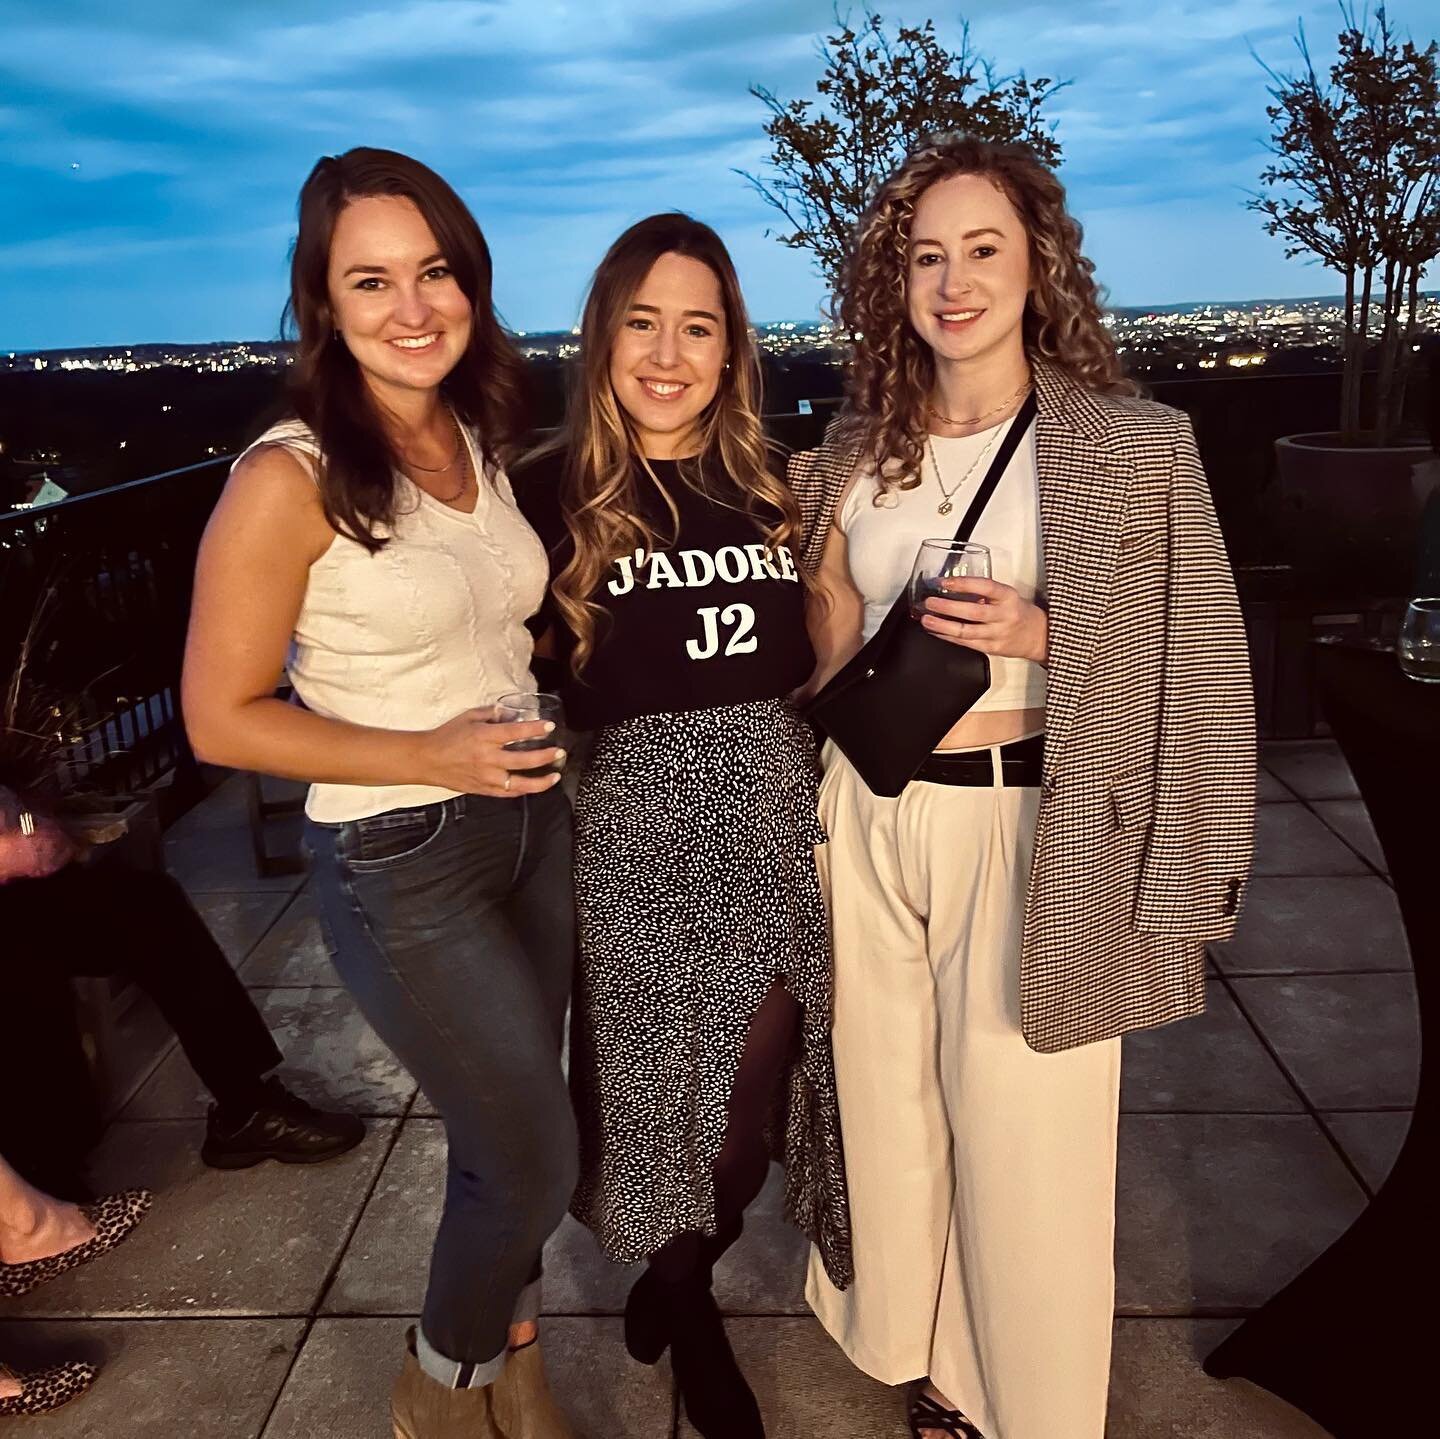 Thanks for coming to celebrate all things J2, Raquel @ortega_somm joining the team, and even some future employees! 😉

The views, vino &amp; company were incredible!
.
.
.
#j2realestate #dreamhomesunlocked #clientappreciation #makinghomeshome #views